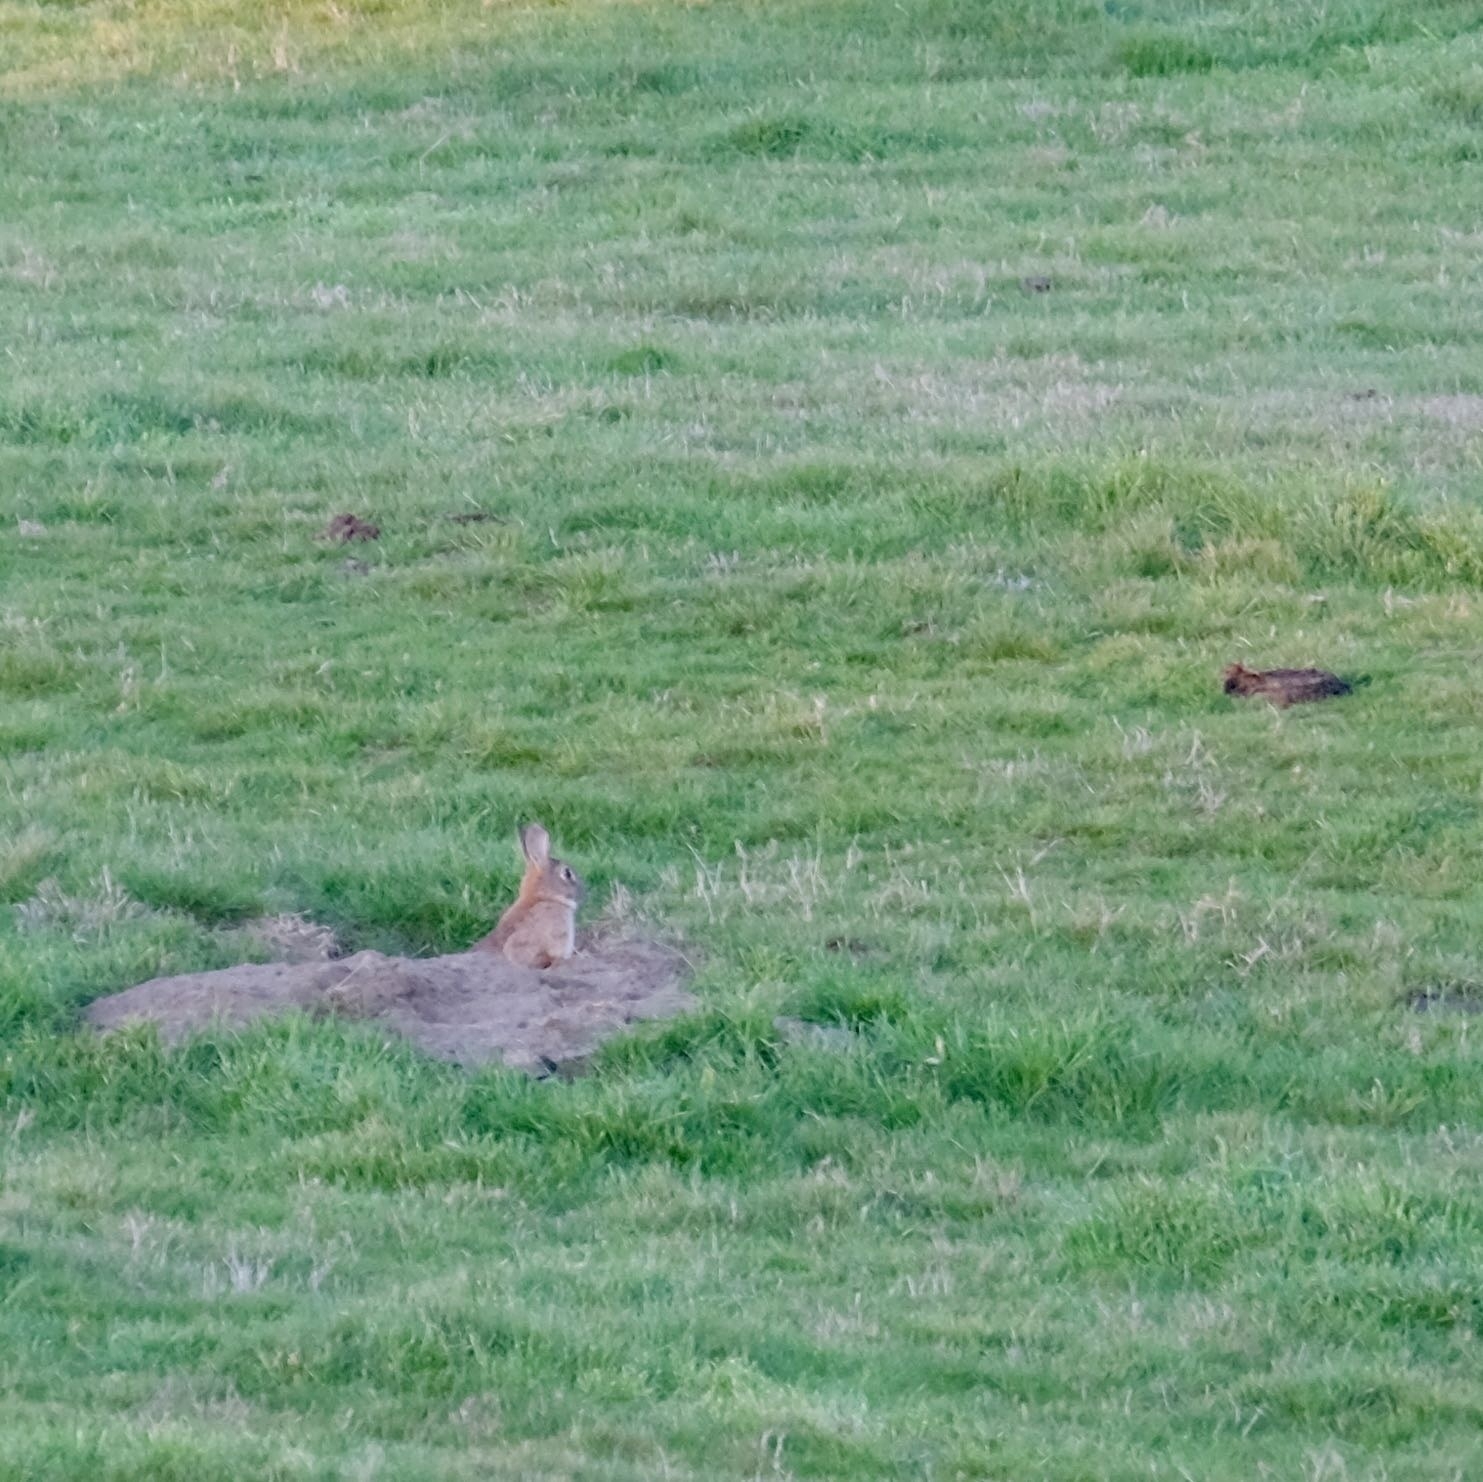 Rabbit at the top of a burrow in a green paddock. 